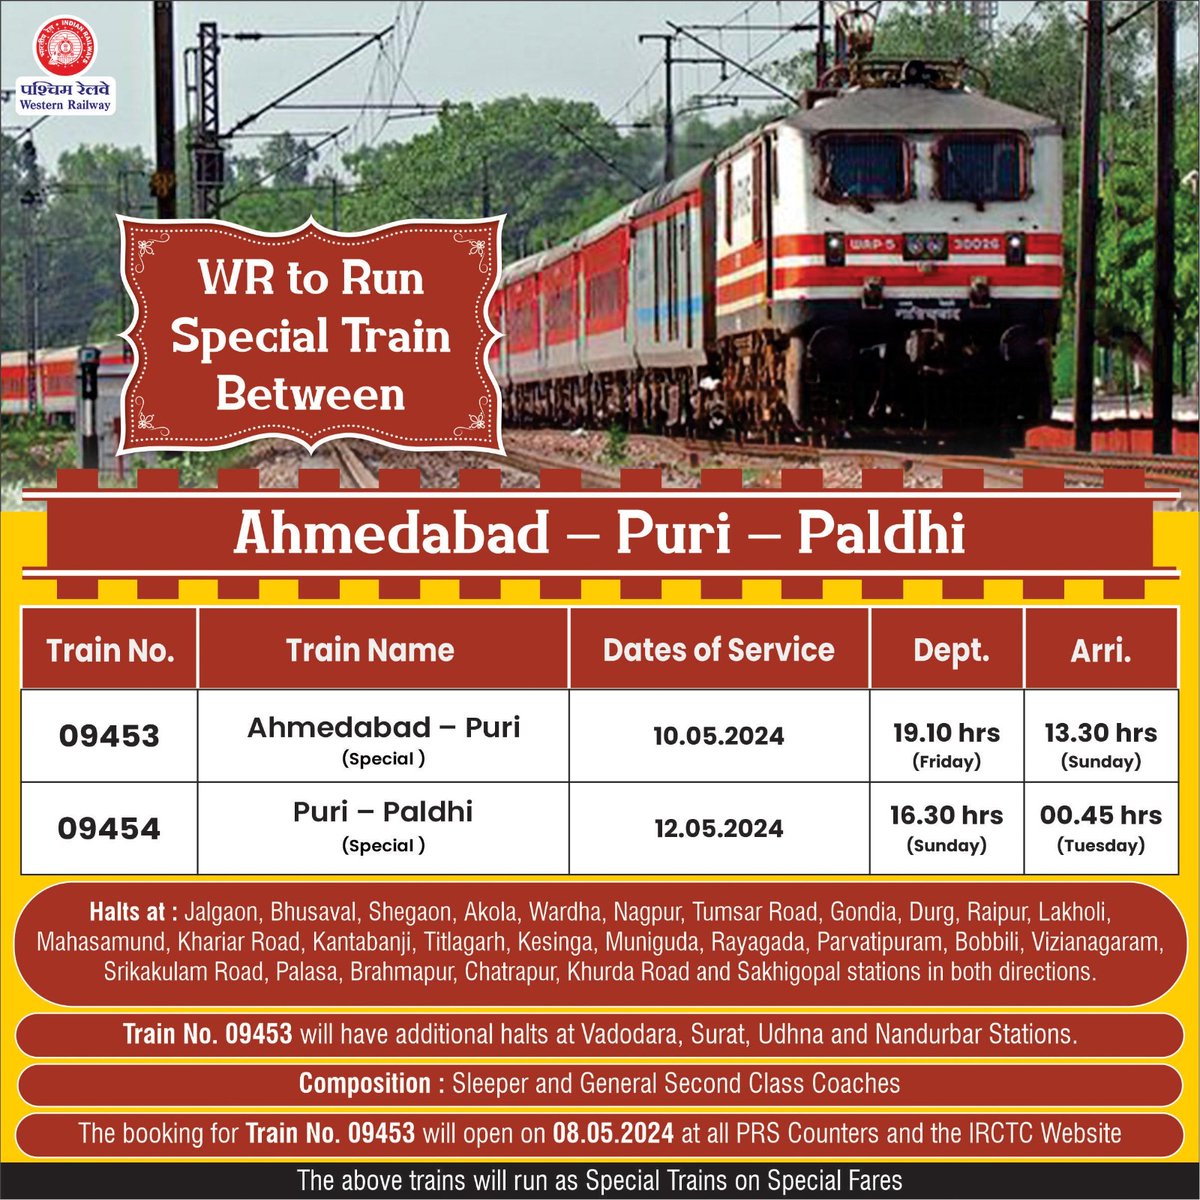 WR will run 09453/54 Ahmedabad - Puri - Paldhi Special for the convenience of passengers and to meet the travel demand.

The booking for train no. 09453 is open at all PRS Counters and the IRCTC Website. #Summerspecial  @RailMinIndia